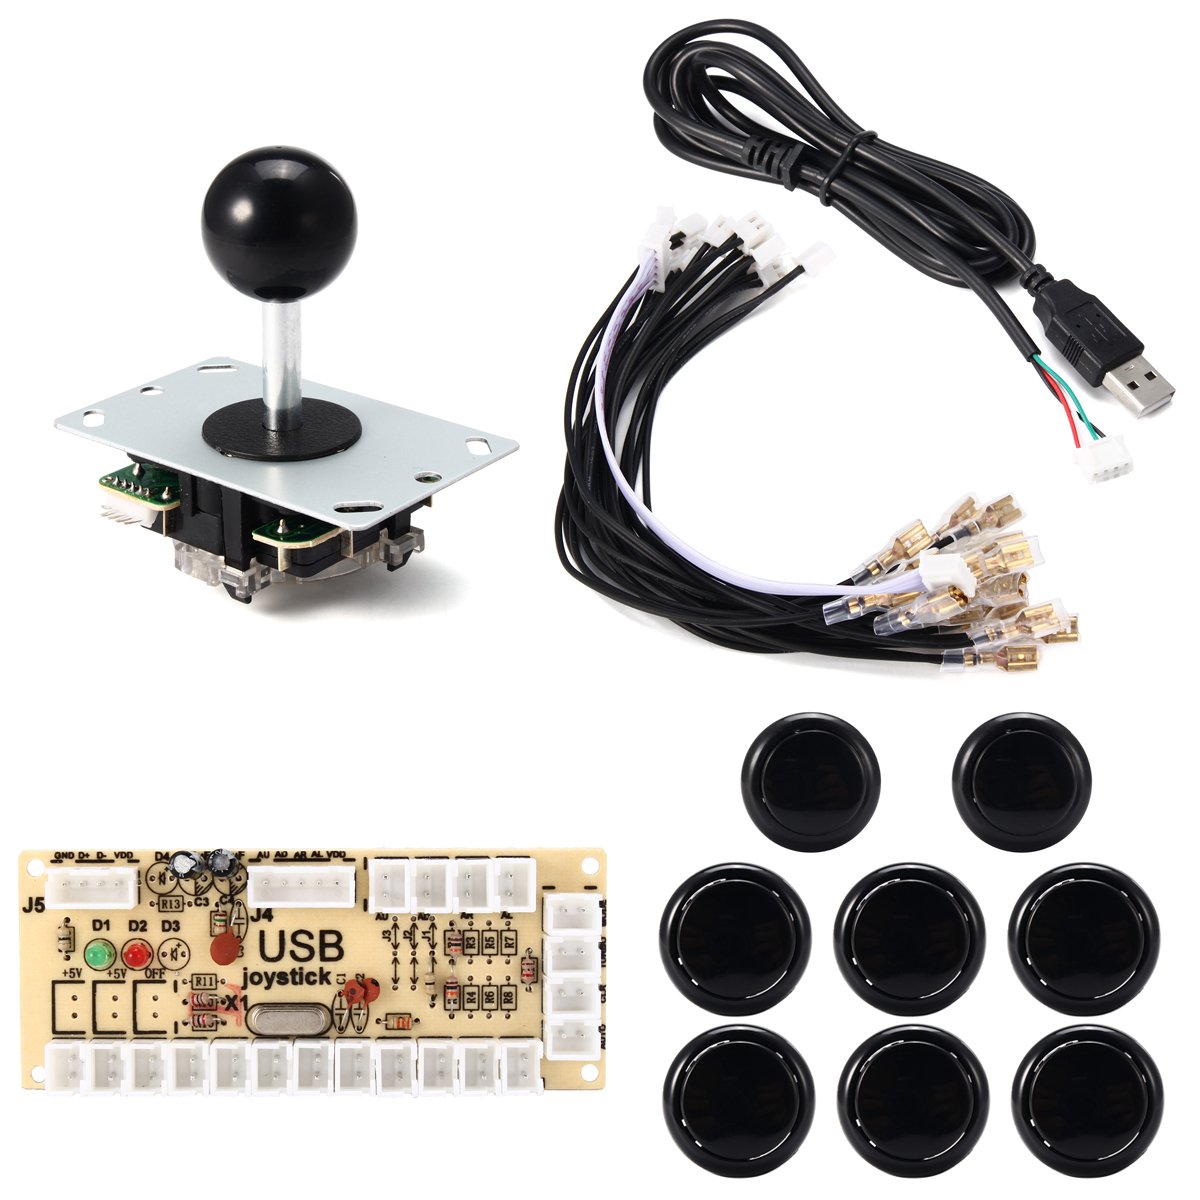 Joystick Push Button Game Controller DIY Kit for Arcade Fighting Video Game PC 2